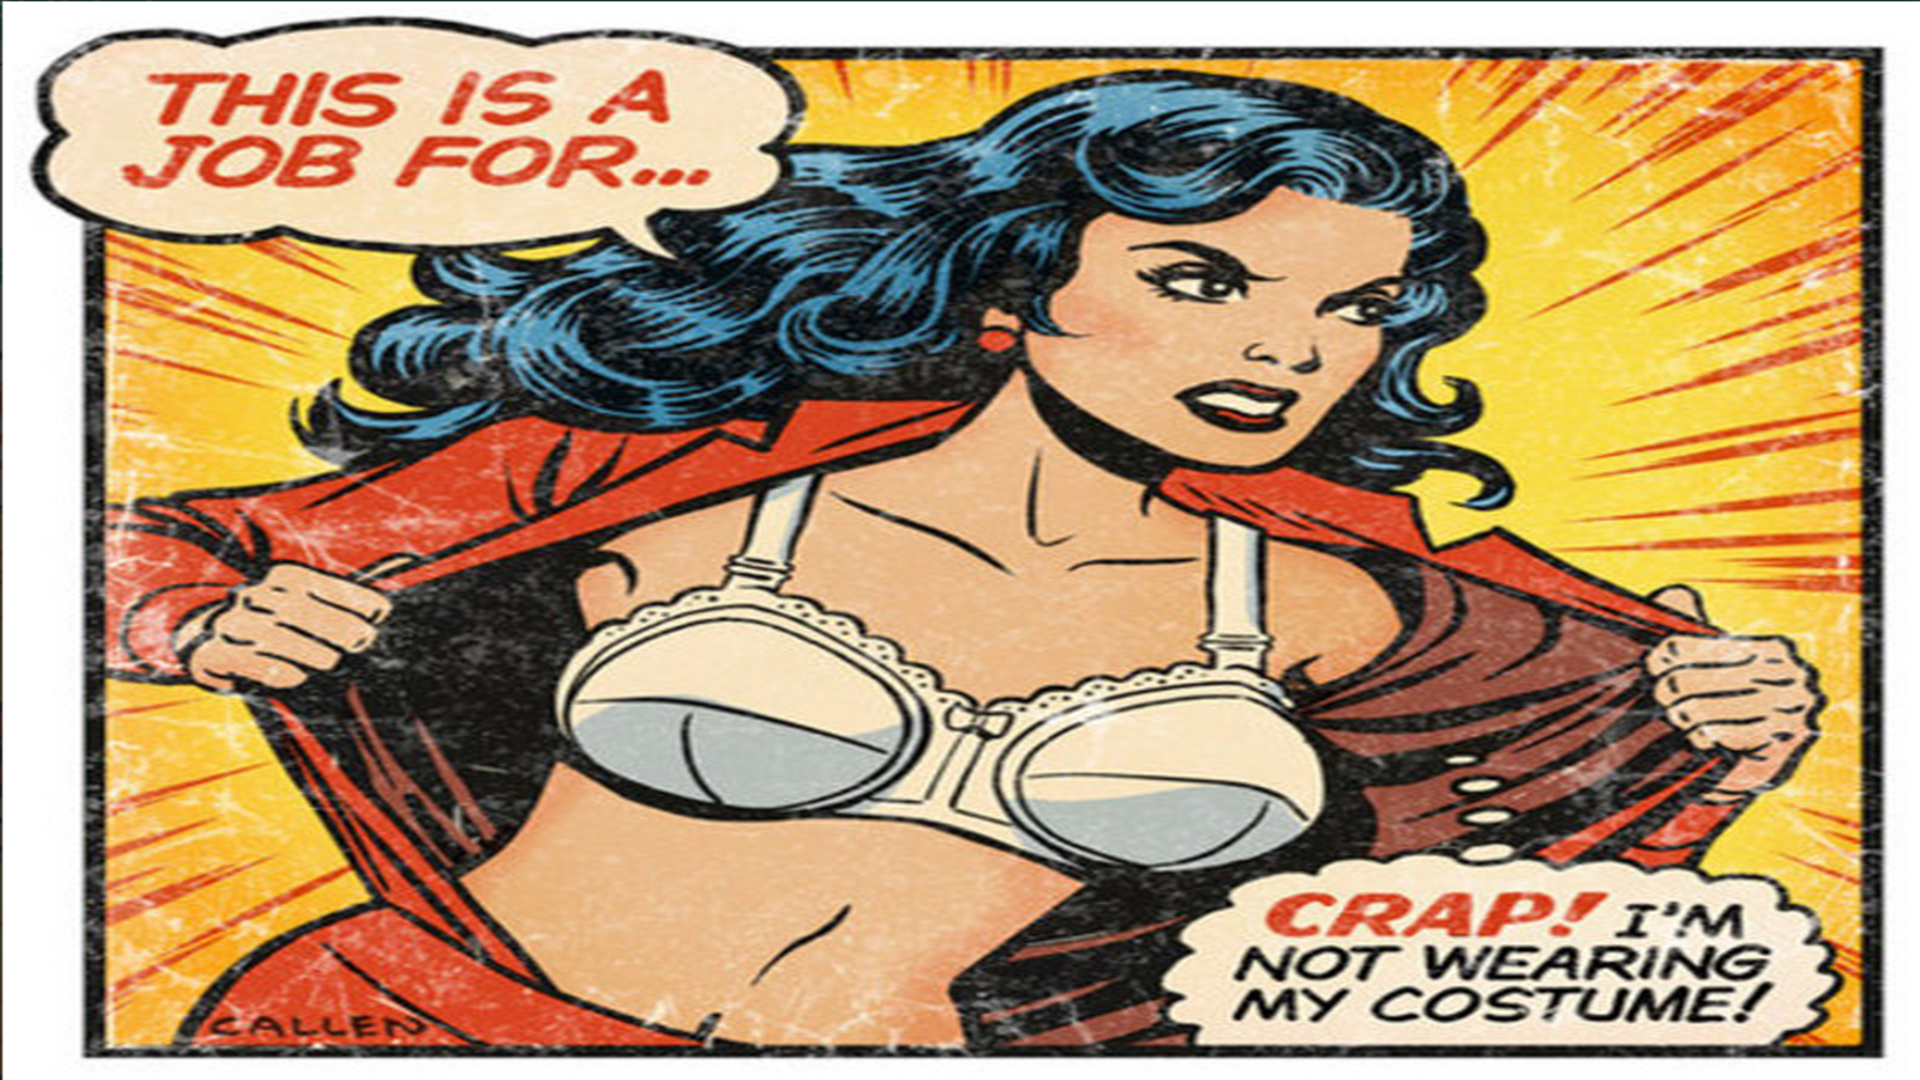 Life lessons from Wonder Woman's Bra